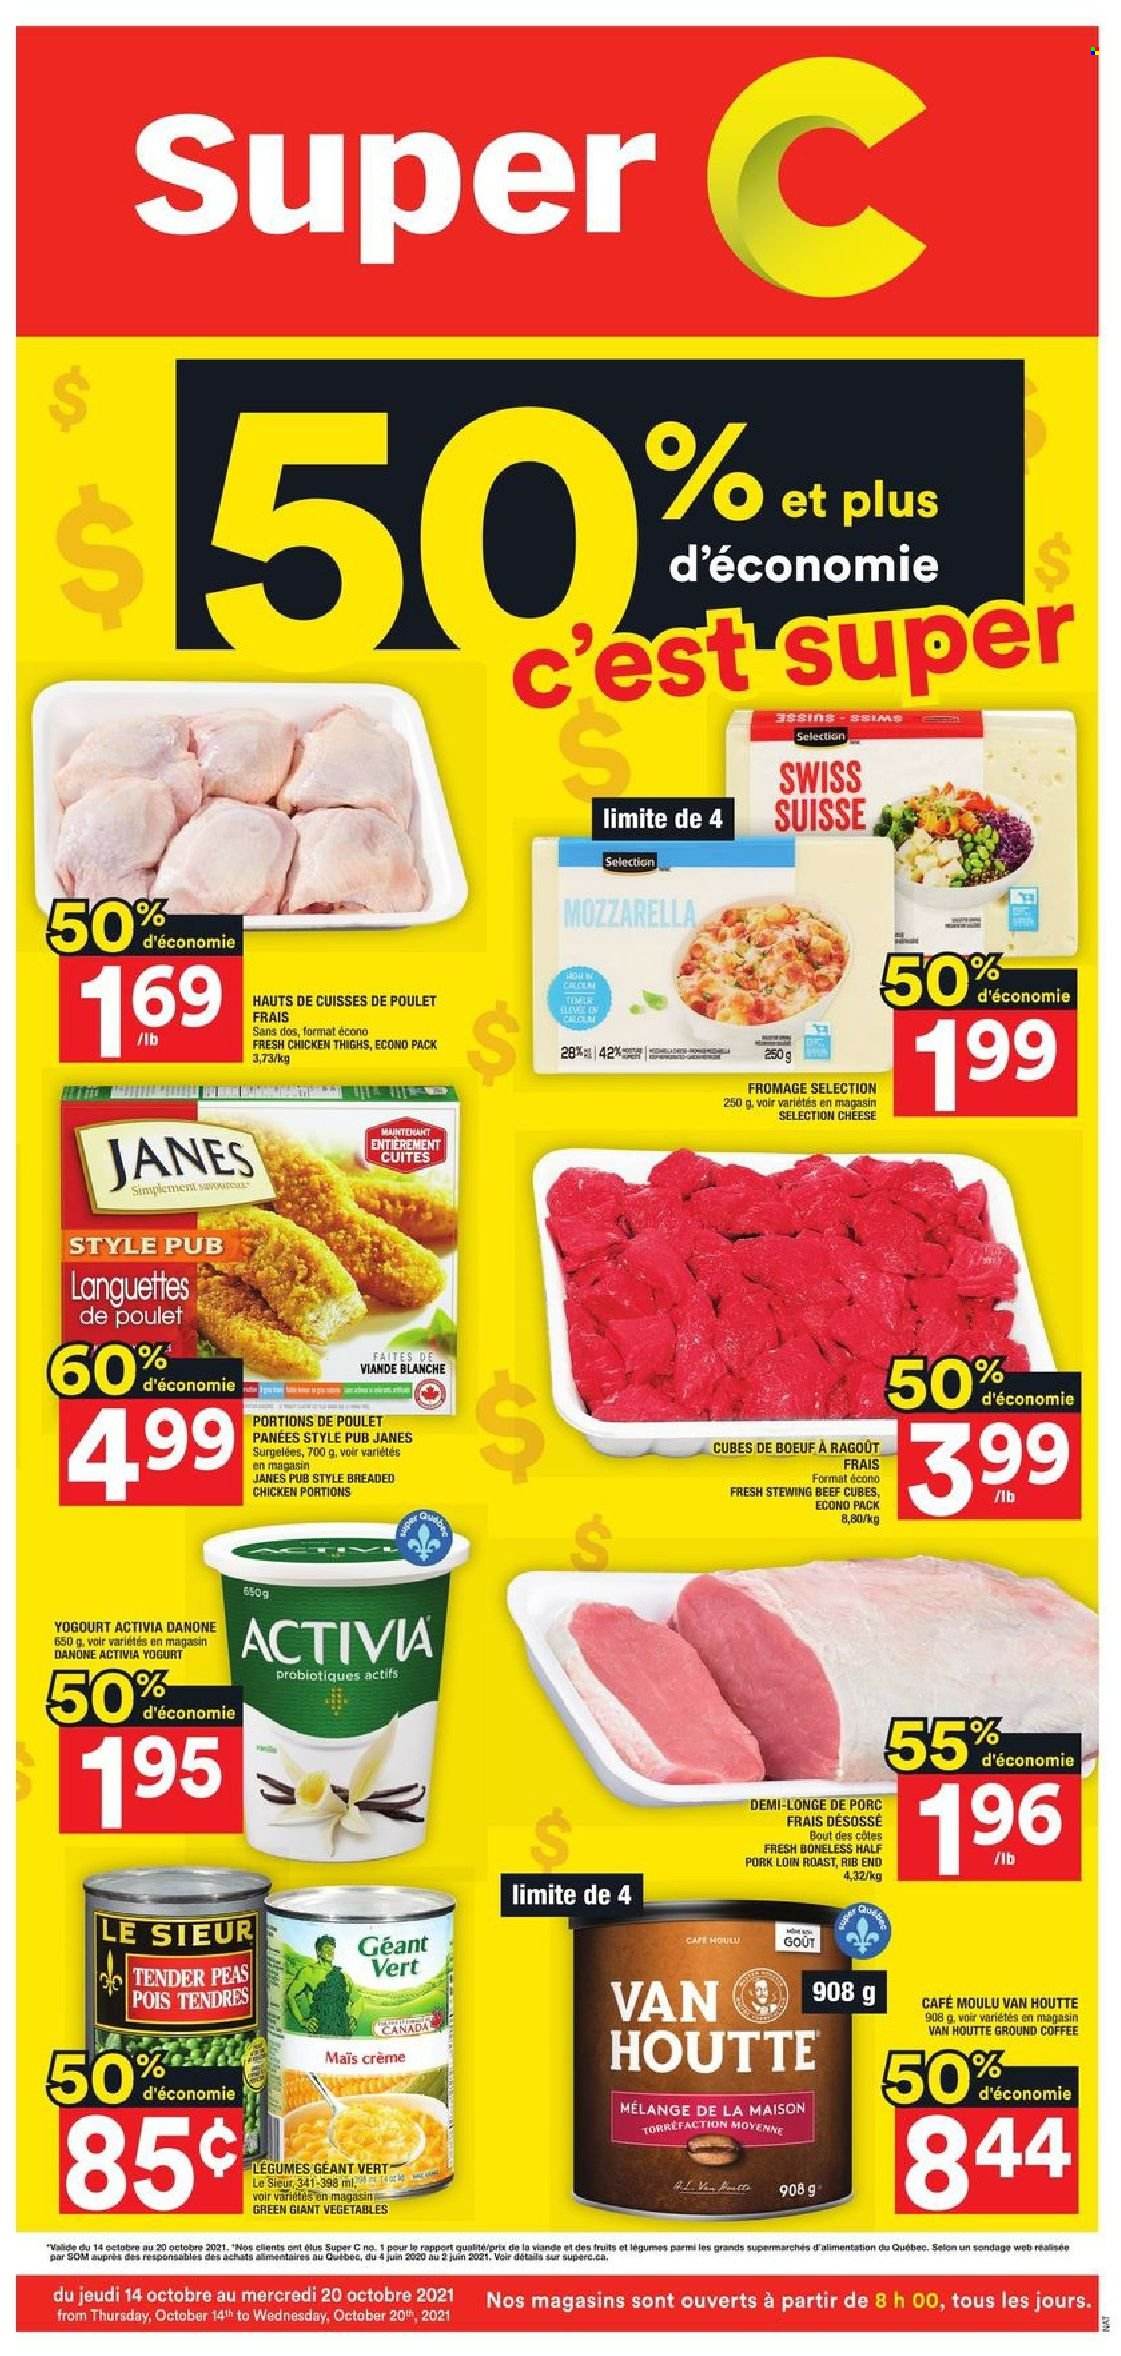 thumbnail - Super C Flyer - October 14, 2021 - October 20, 2021 - Sales products - peas, fried chicken, cheese, yoghurt, Activia, coffee, ground coffee, chicken thighs, chicken, beef meat, stewing beef, pork loin, pork meat, Danone, mozzarella. Page 1.